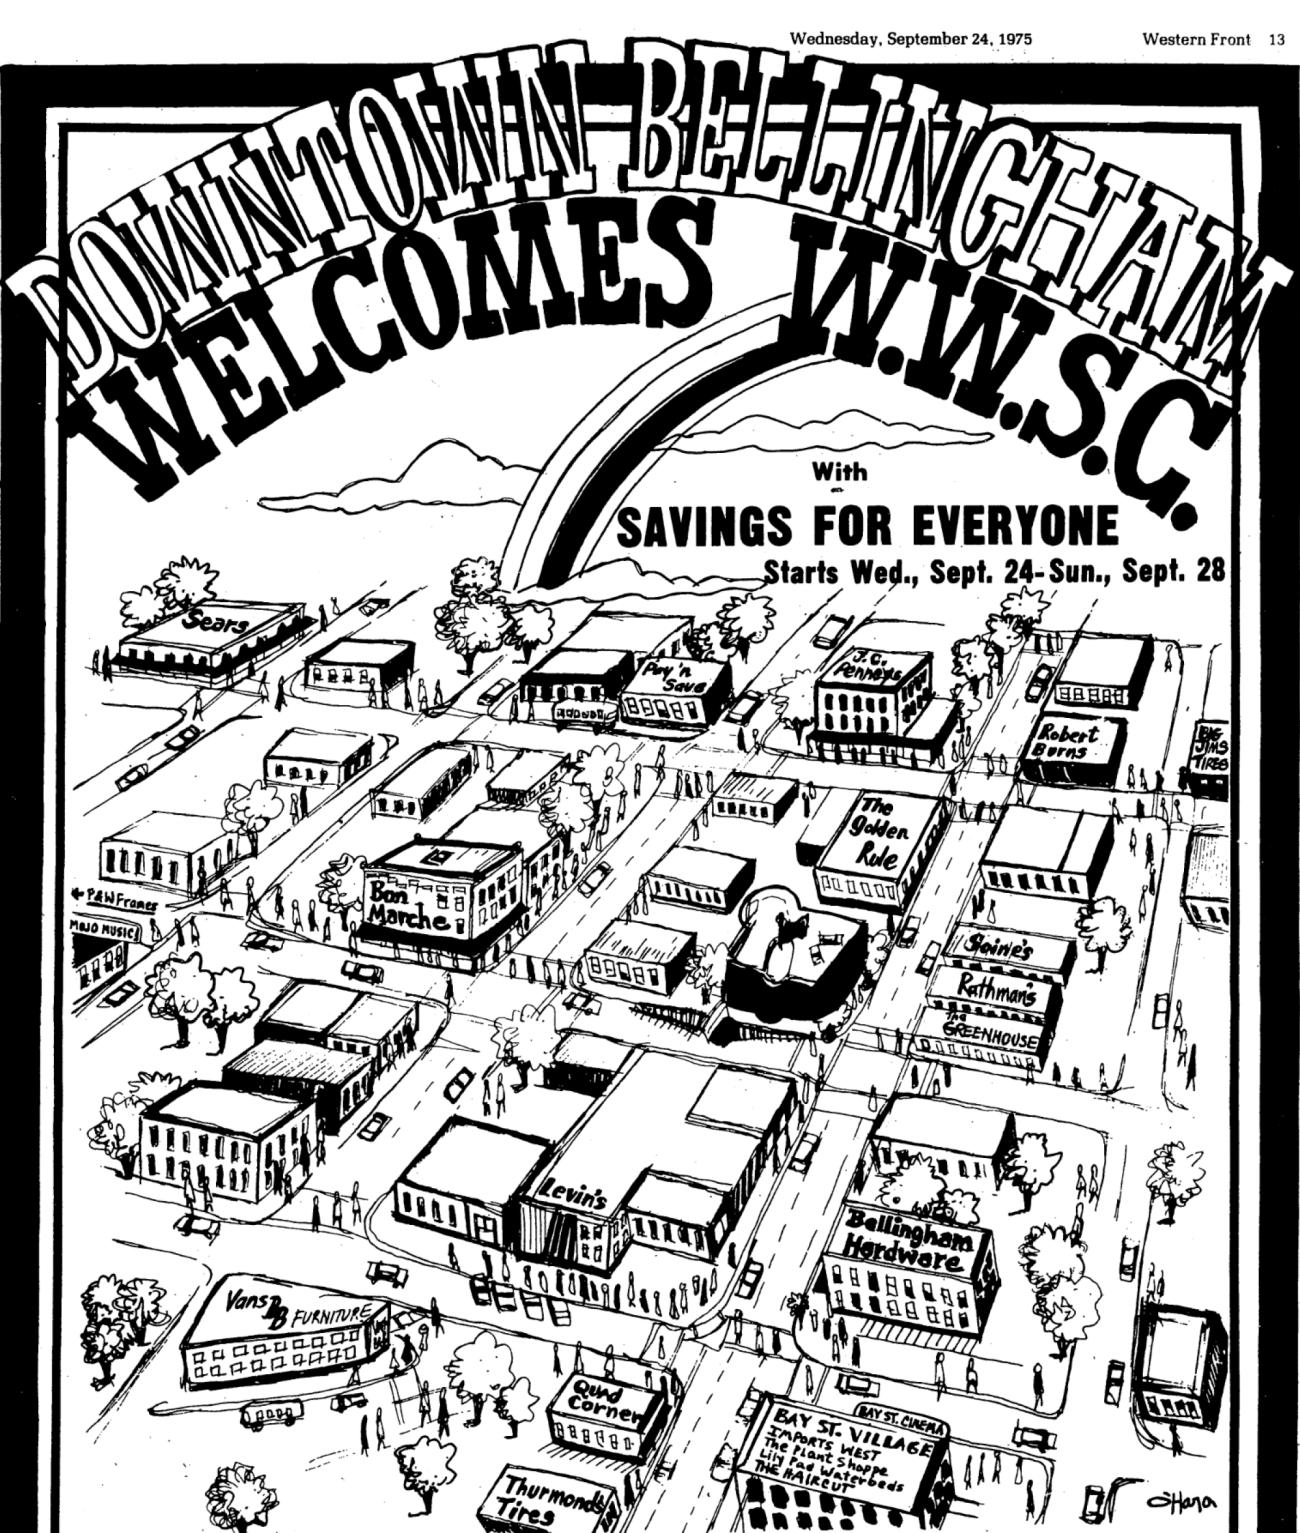 Hand-drawn 3D map of downtown Bellingham, a rainbow, and text "Downtown Bellingham Welcomes WWSC with savings for everyone" and dates